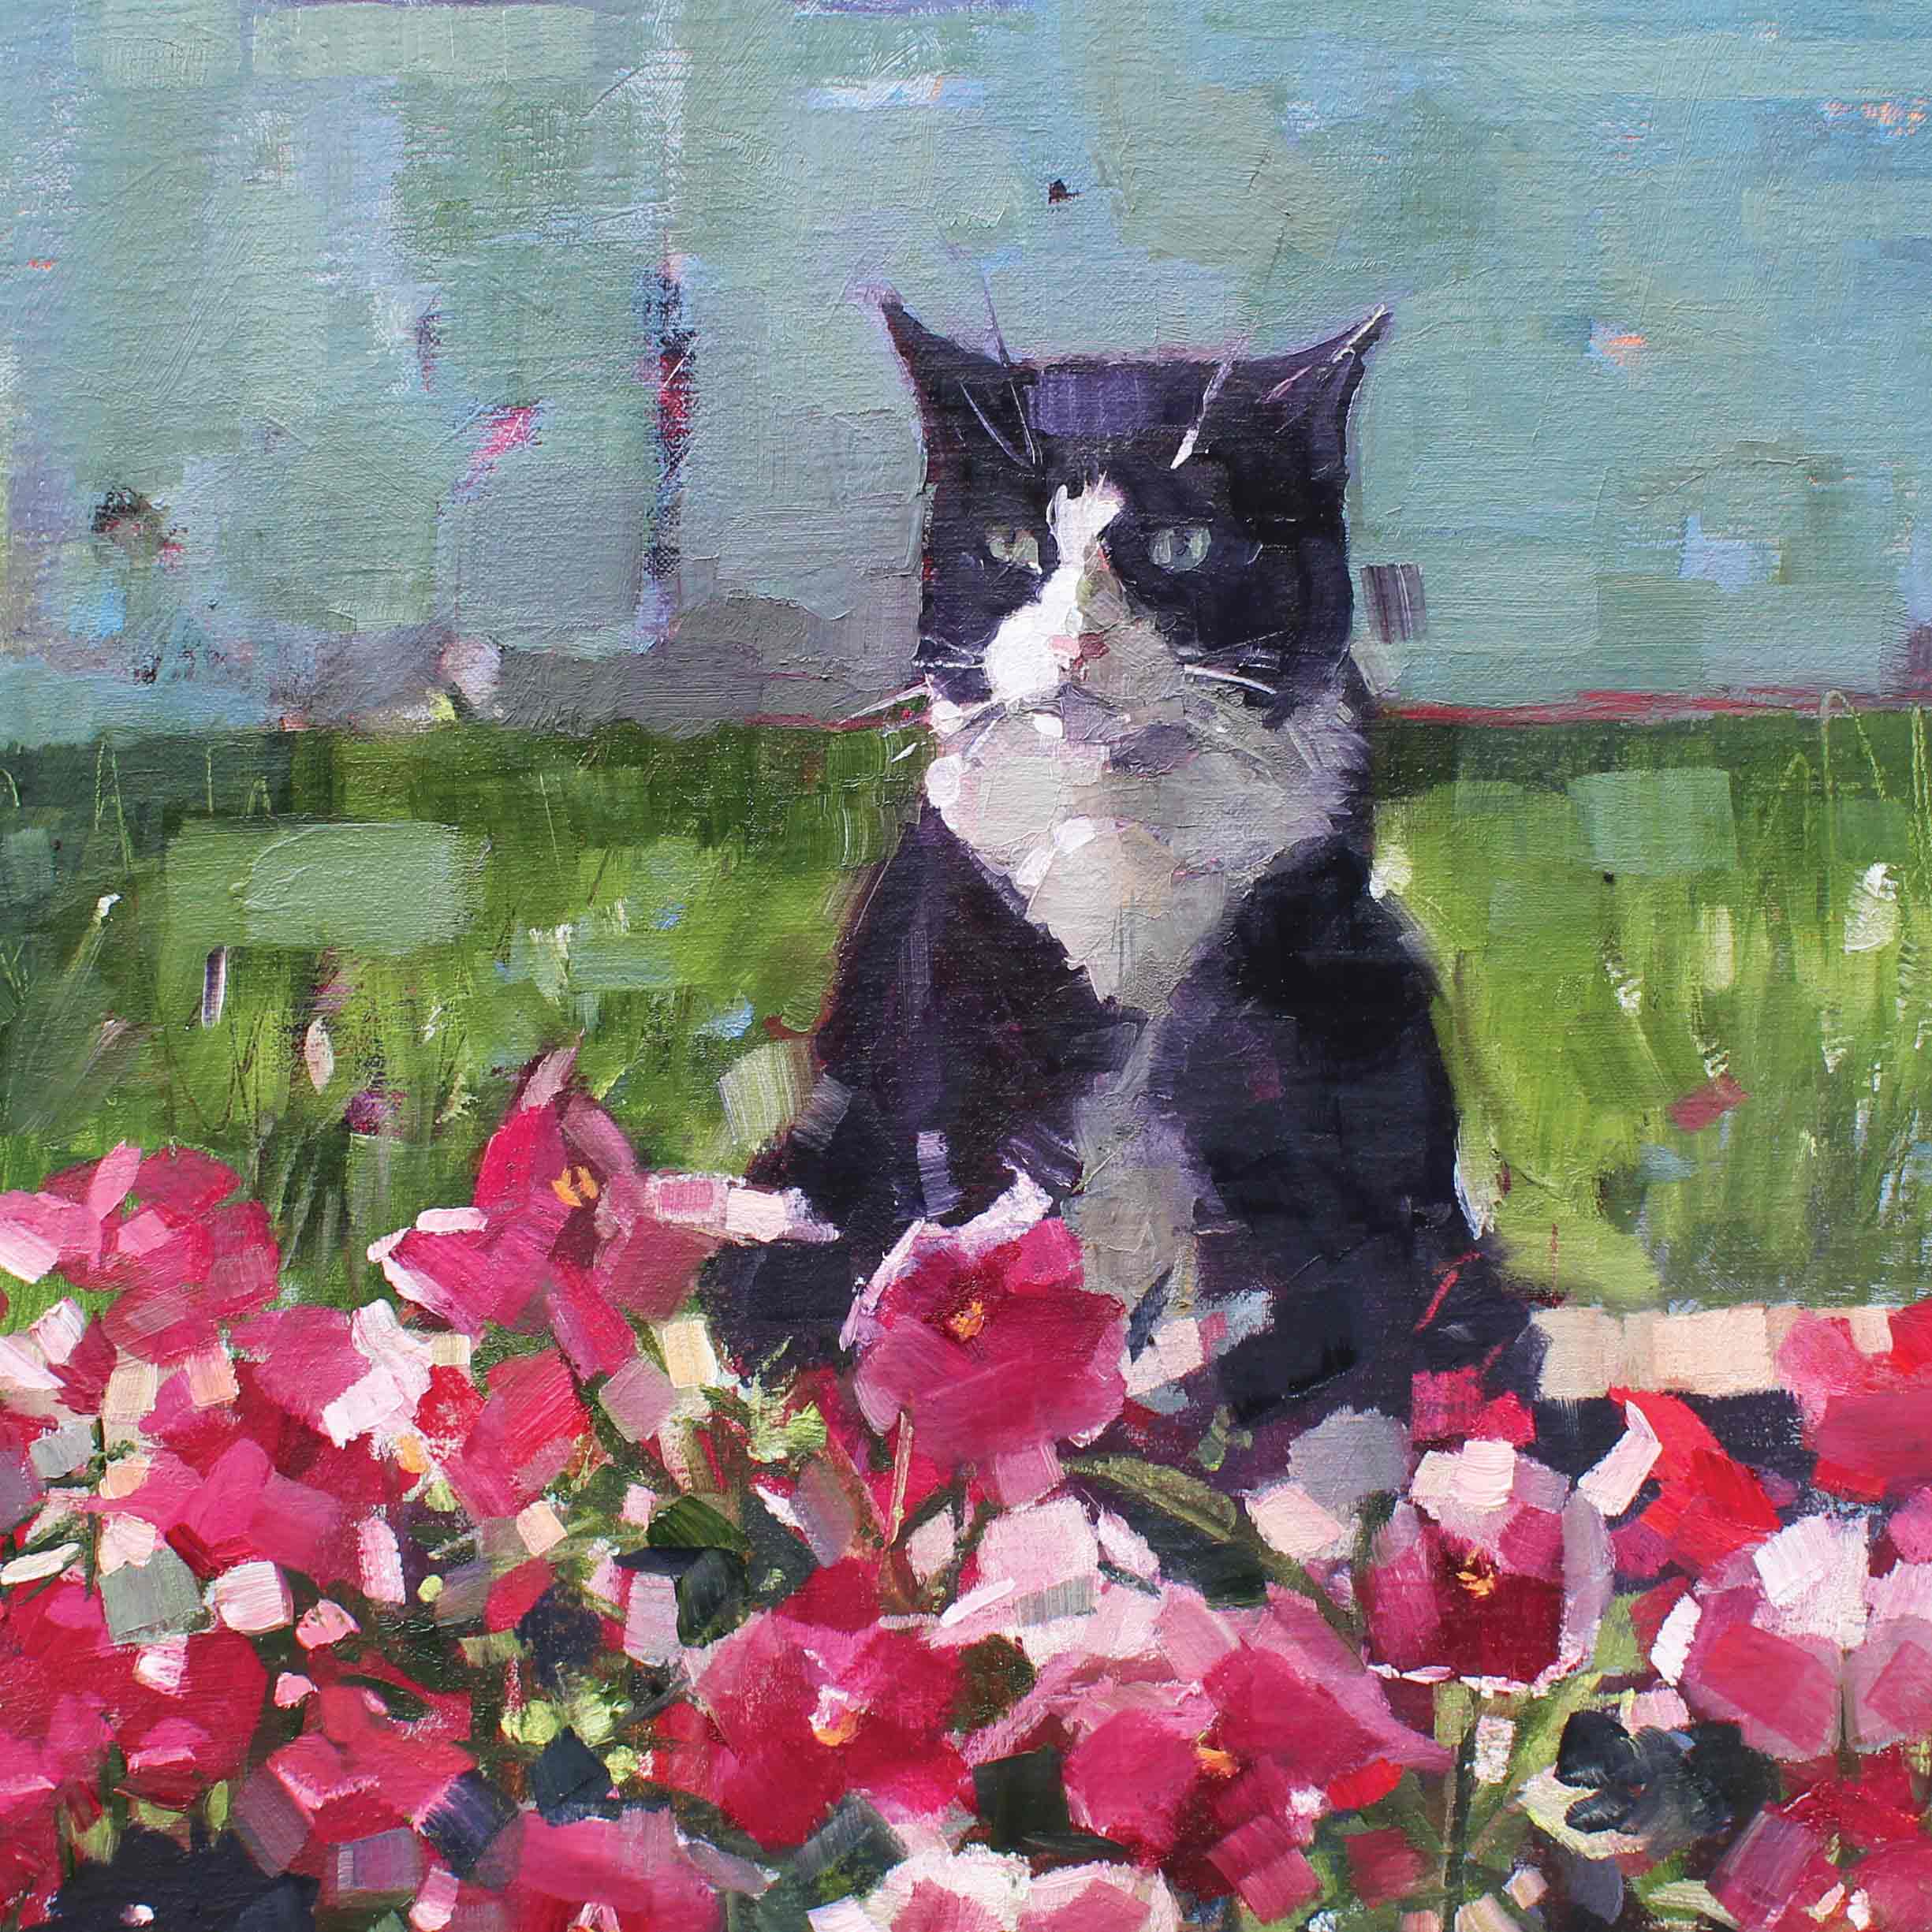 Art Greeting Cards by Anne-Marie Butlin, Ringo and Pansies, Oil on canvas, Cat in the pansies